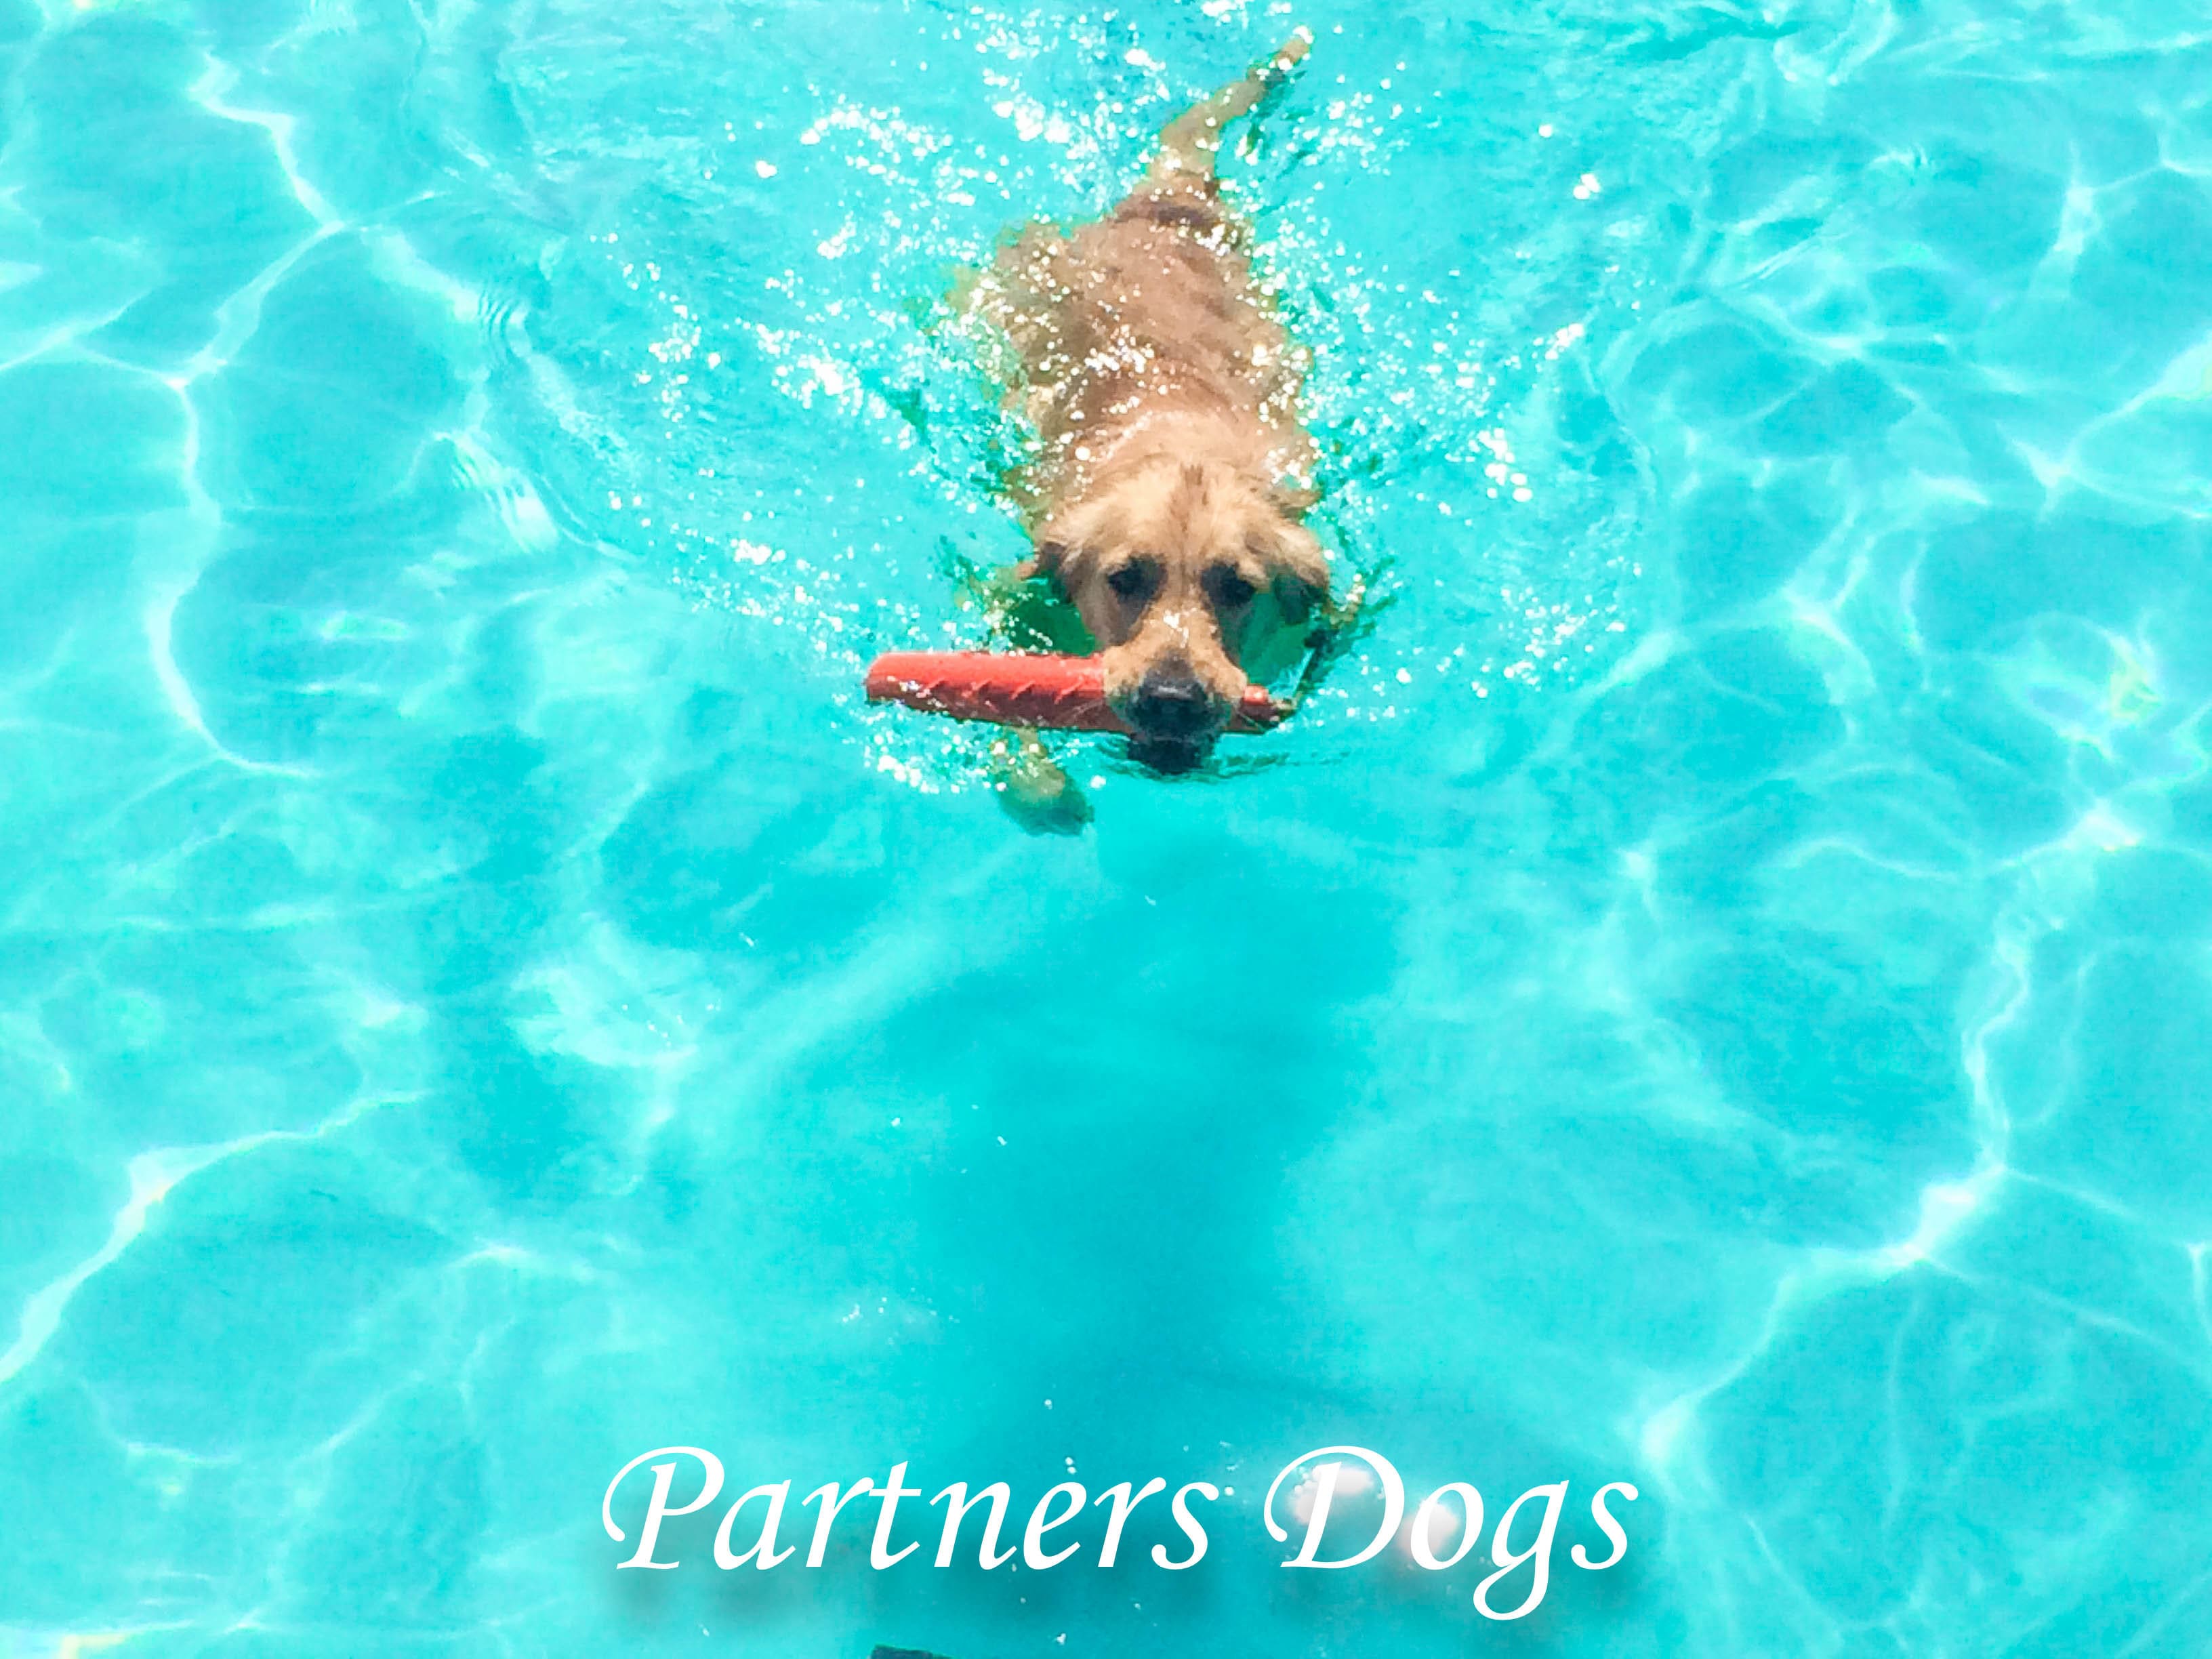 Partners dogs